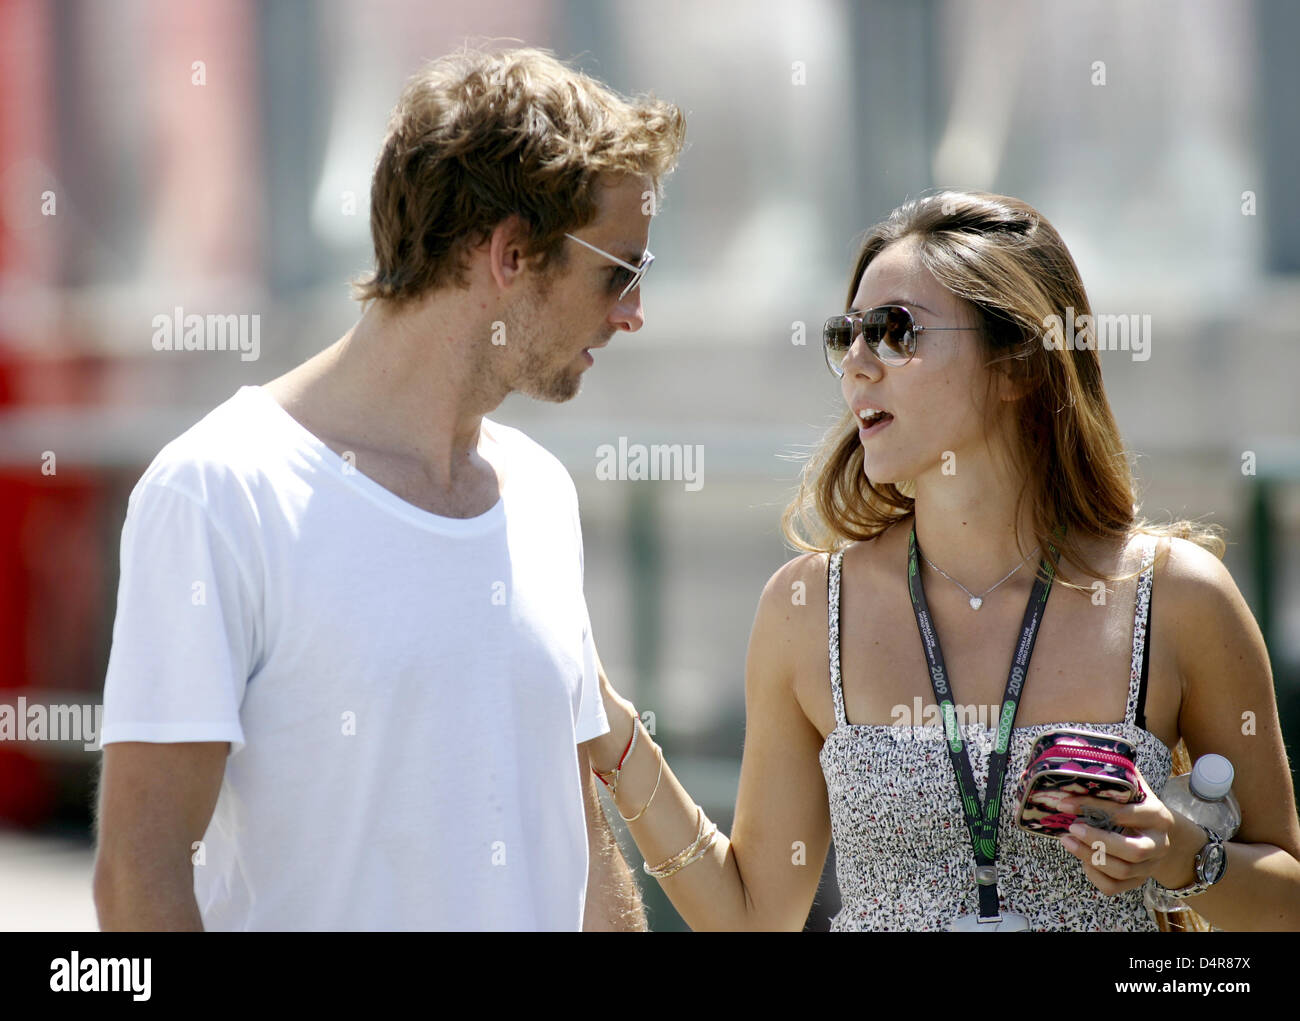 British Formula One driver Jenson Button of Brawn GP (L) and his Japanese model girlfriend Jessica Michibata (R) talk in the pitlane at Hungaroring race track in Mogyorod near Budapest, Hungary, 23 July 2009. The Formula 1 Hungarian Grand Prix takes place on 26 July. Photo: FELIX HEYDER Stock Photo